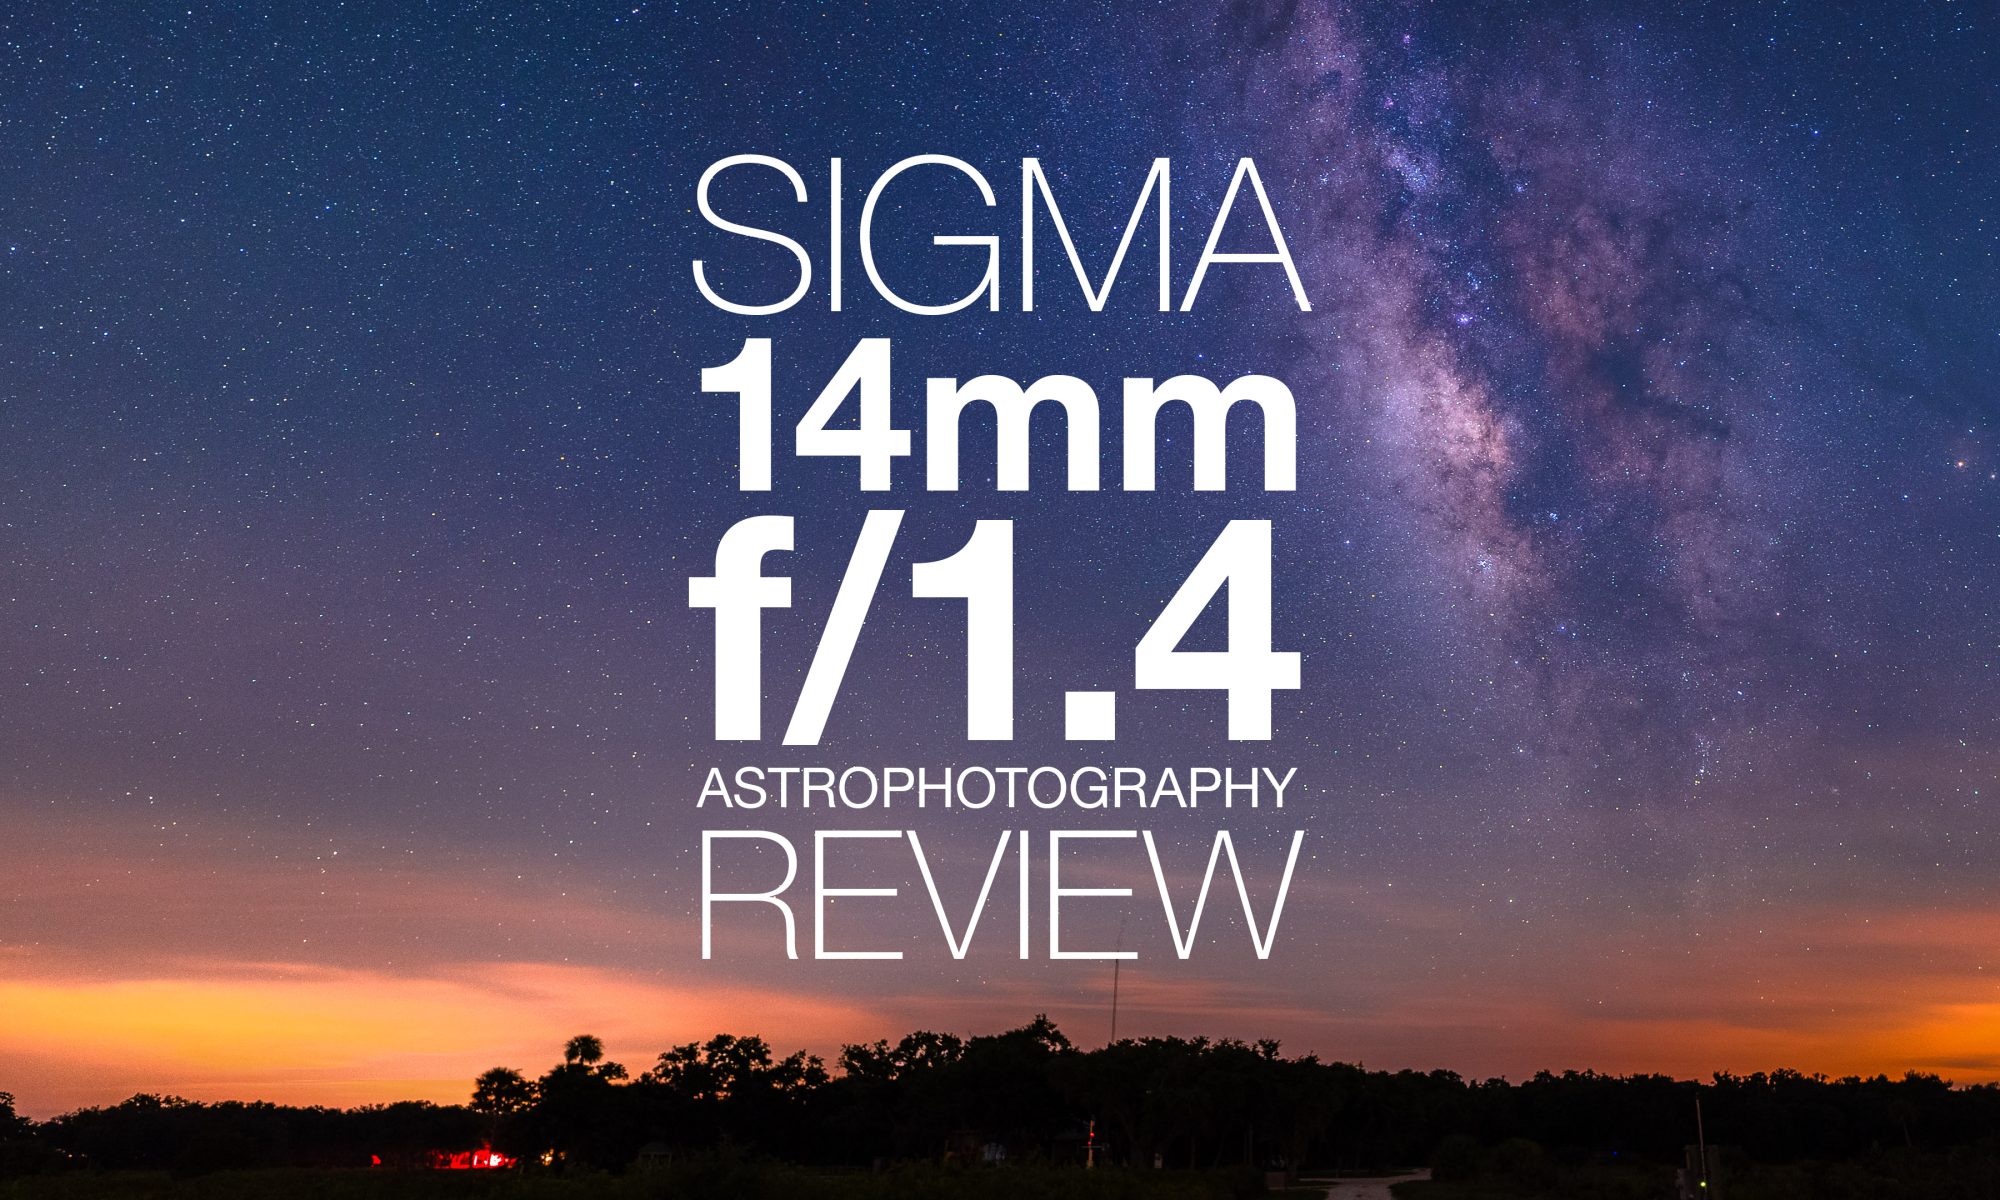 Sigma 14mm f/1.4 DG DN Art Astrophotography Review